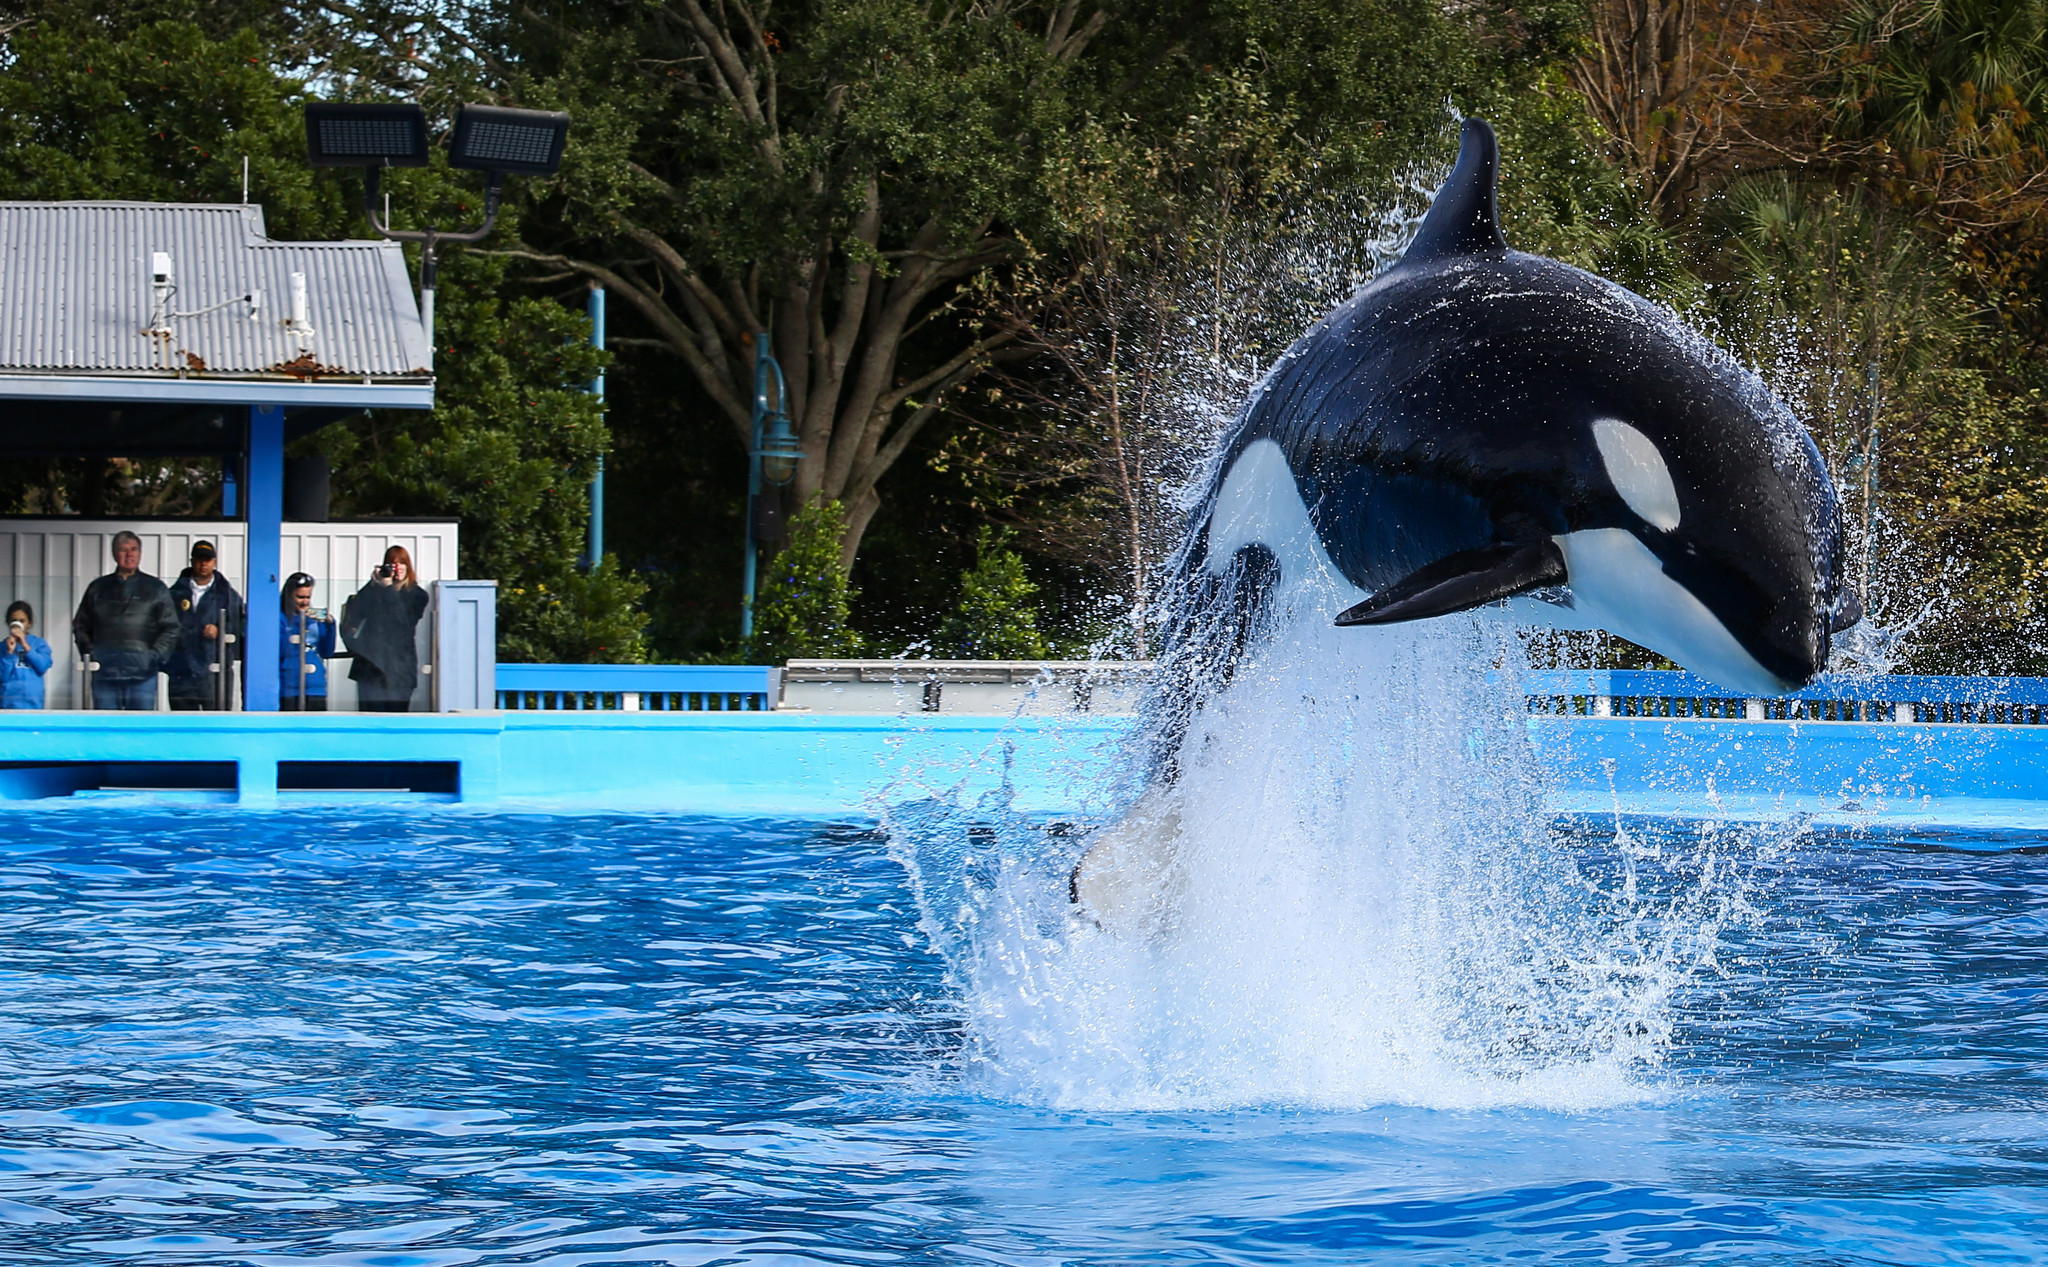 Attendance slips at SeaWorld parks, but company reports record annual